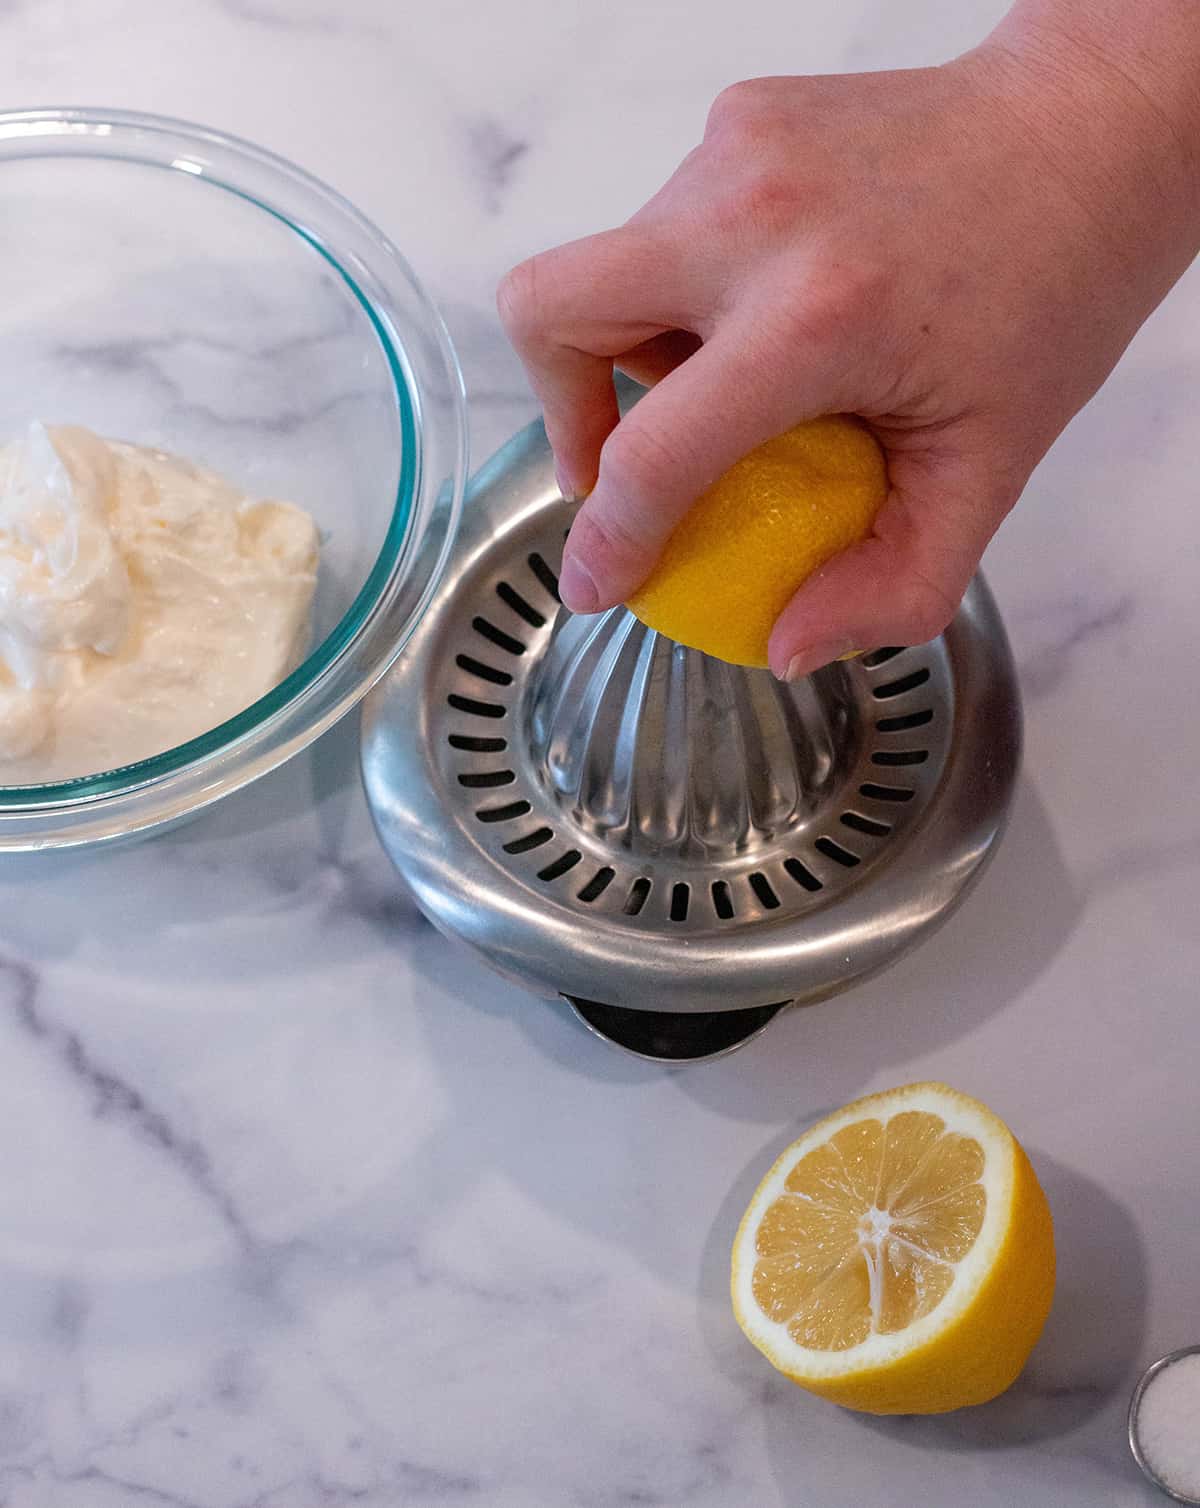 A lemon being squeezed on a lemon juicer.